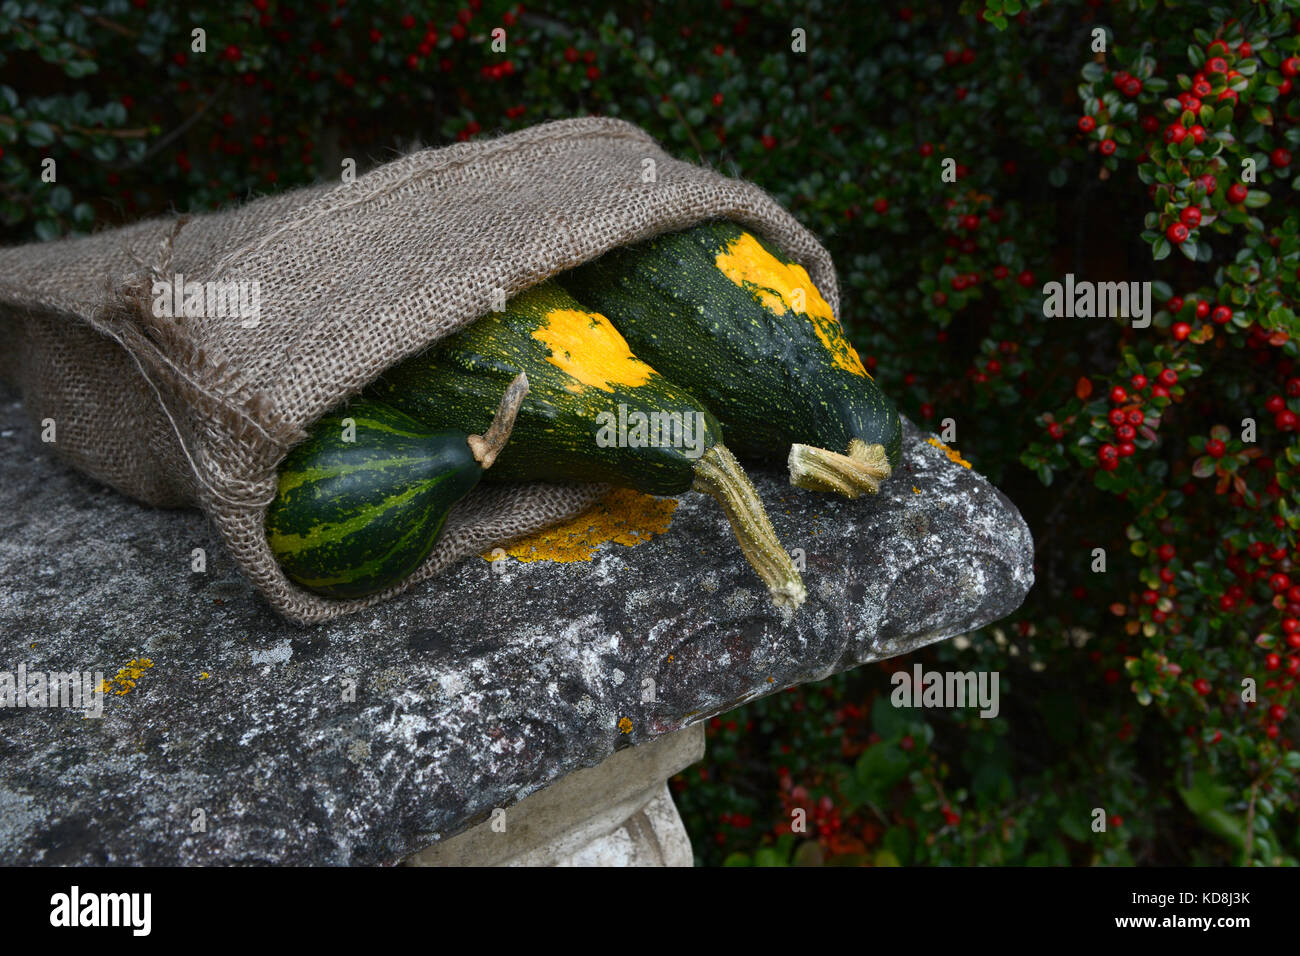 Three green ornamental gourds in a rough sack, on a stone garden seat Stock Photo